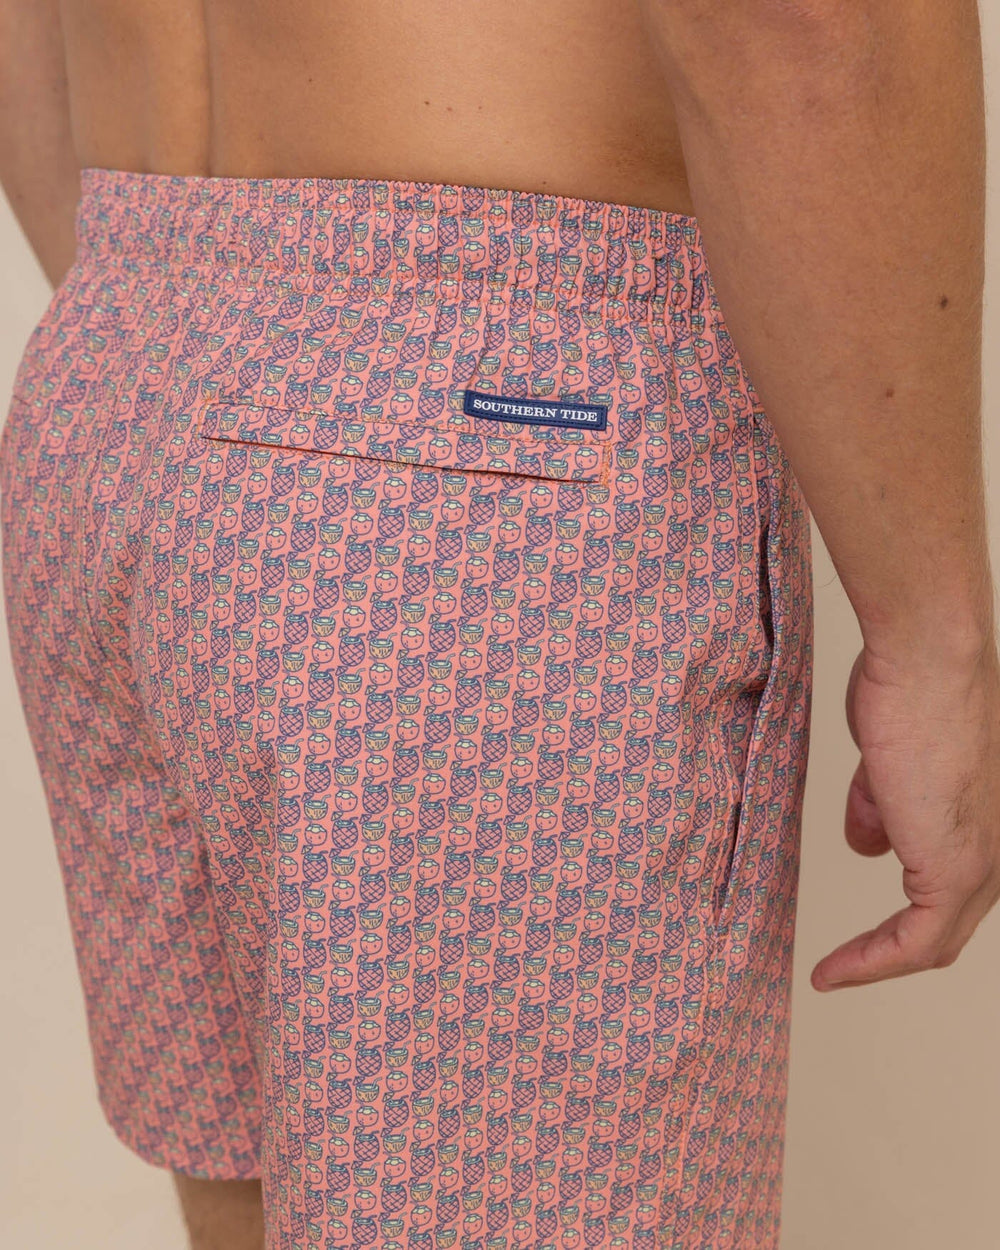 The detail view of the Southern Tide Vacation Views Swim Trunk by Southern Tide - Desert Flower Coral